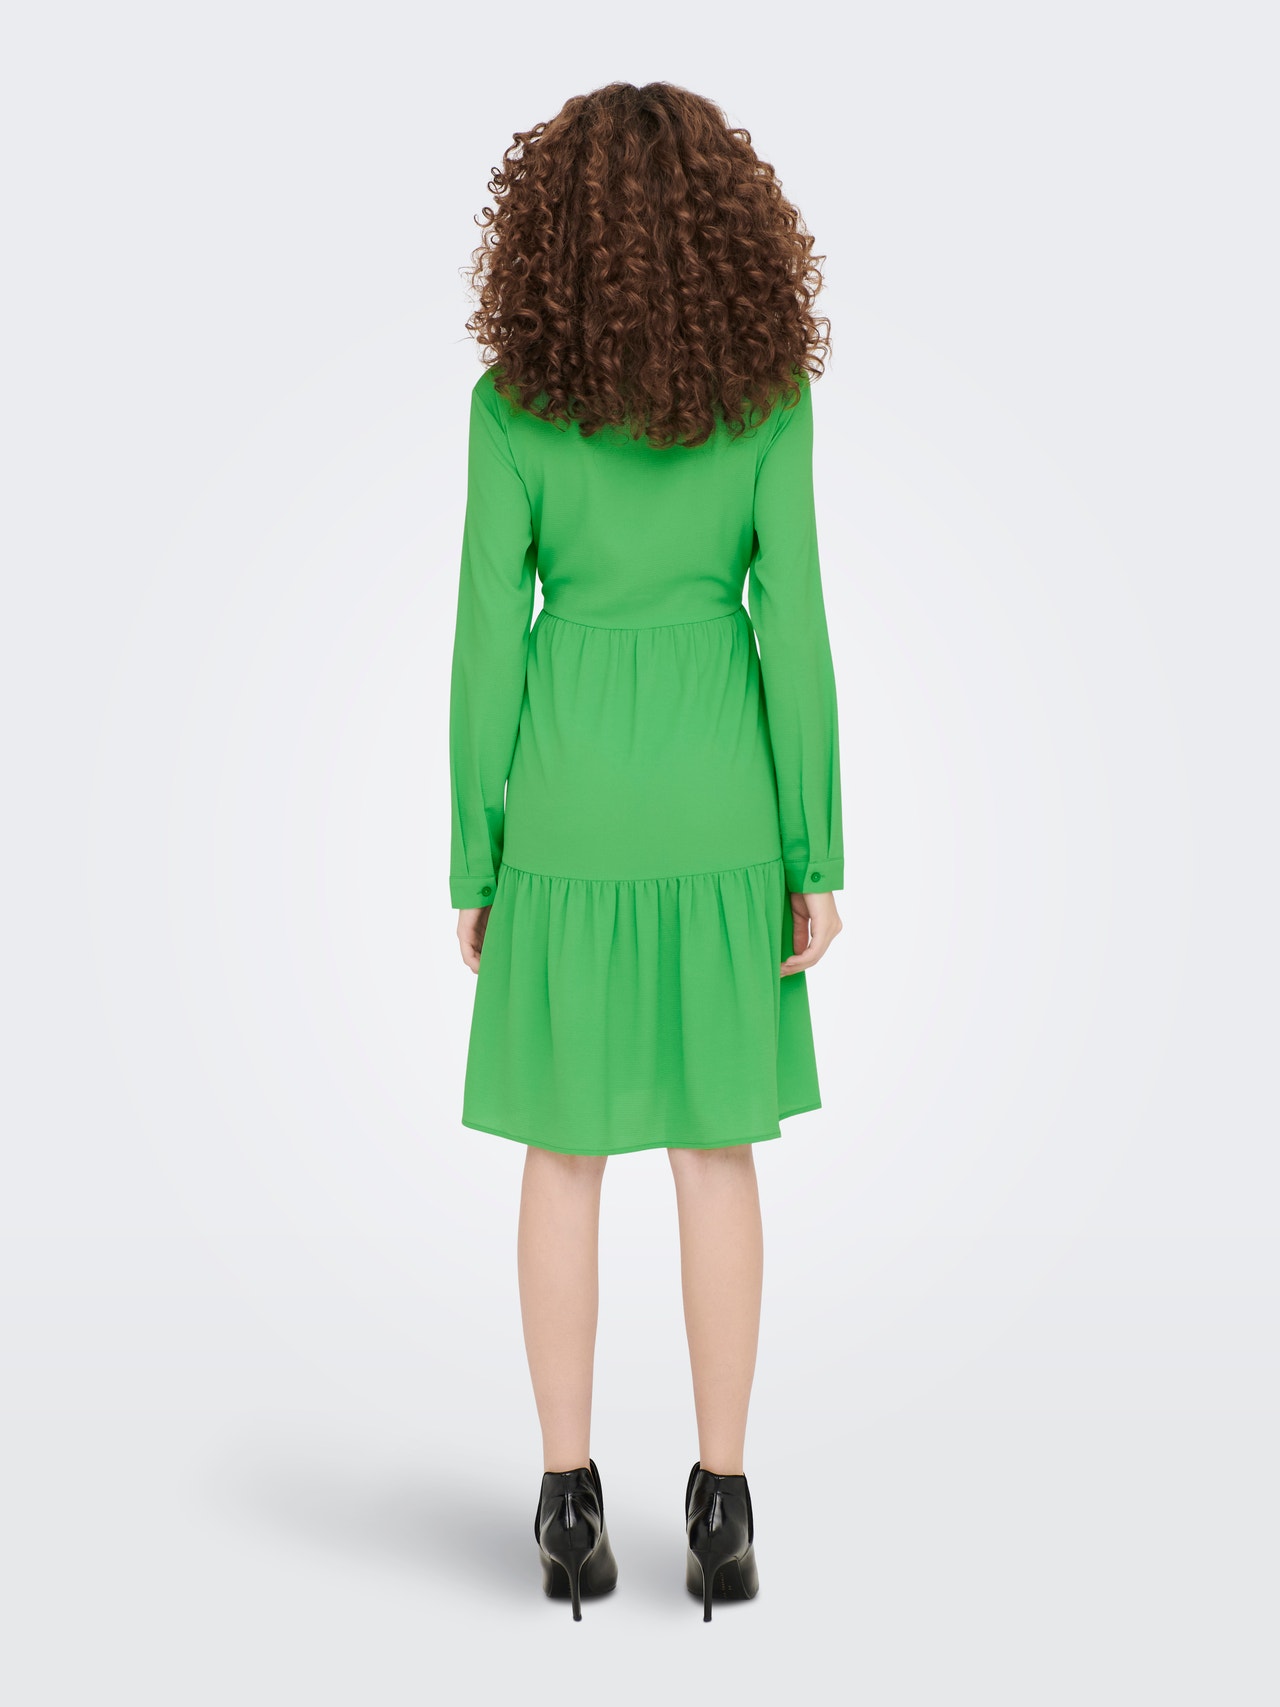 ONLY Solid colored Shirt dress -Kelly Green - 15212412